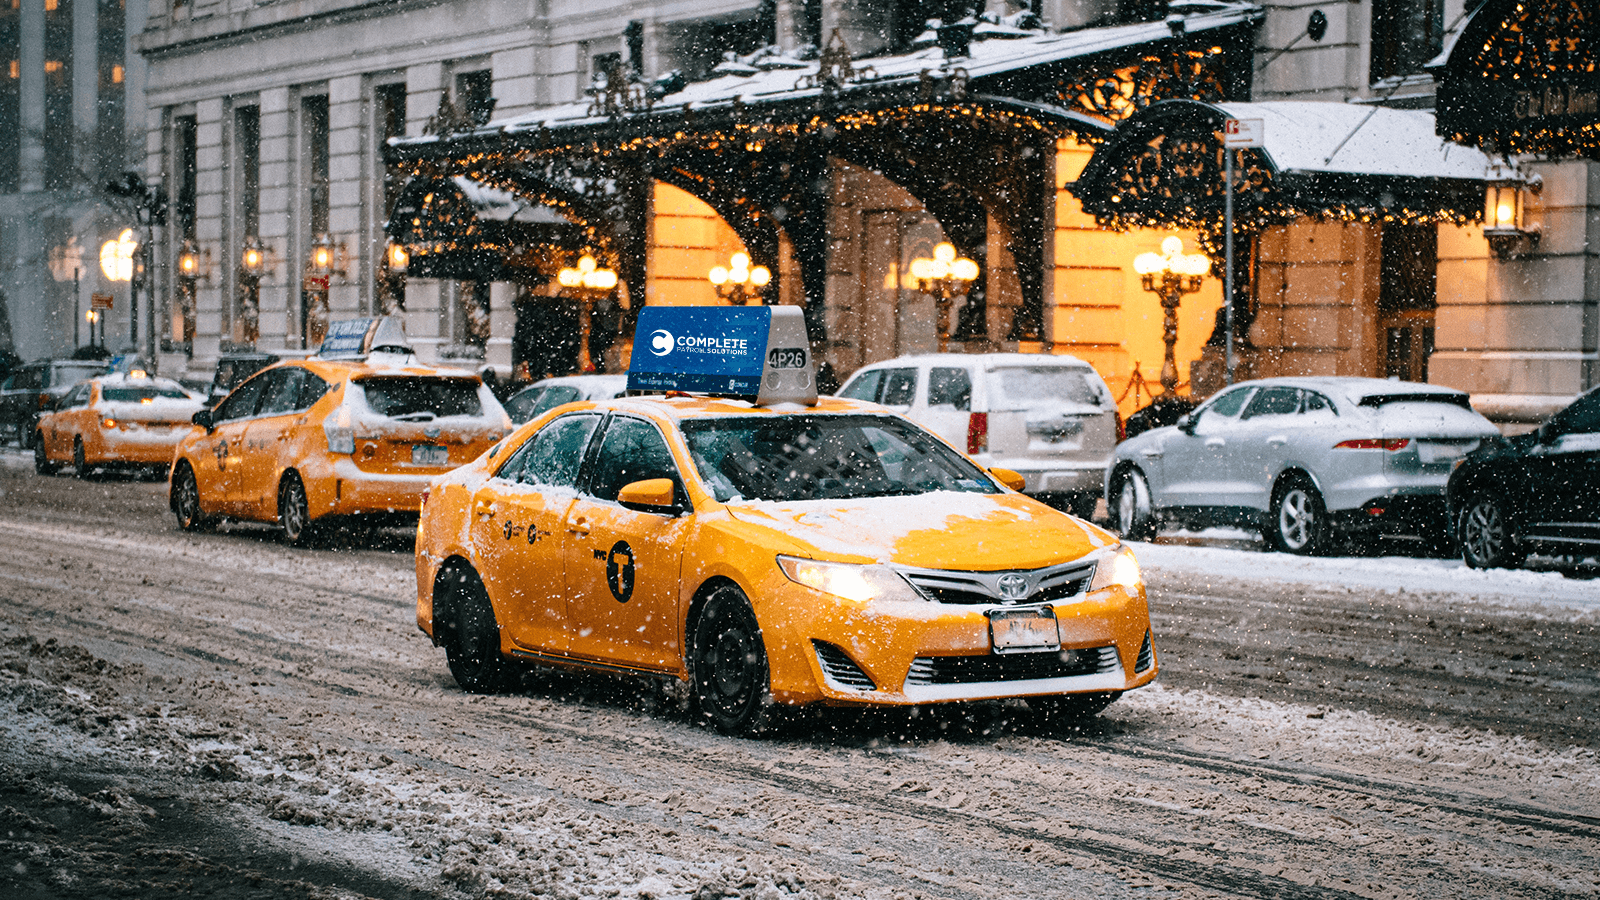 A yellow cab drives through a snow covered road in a city